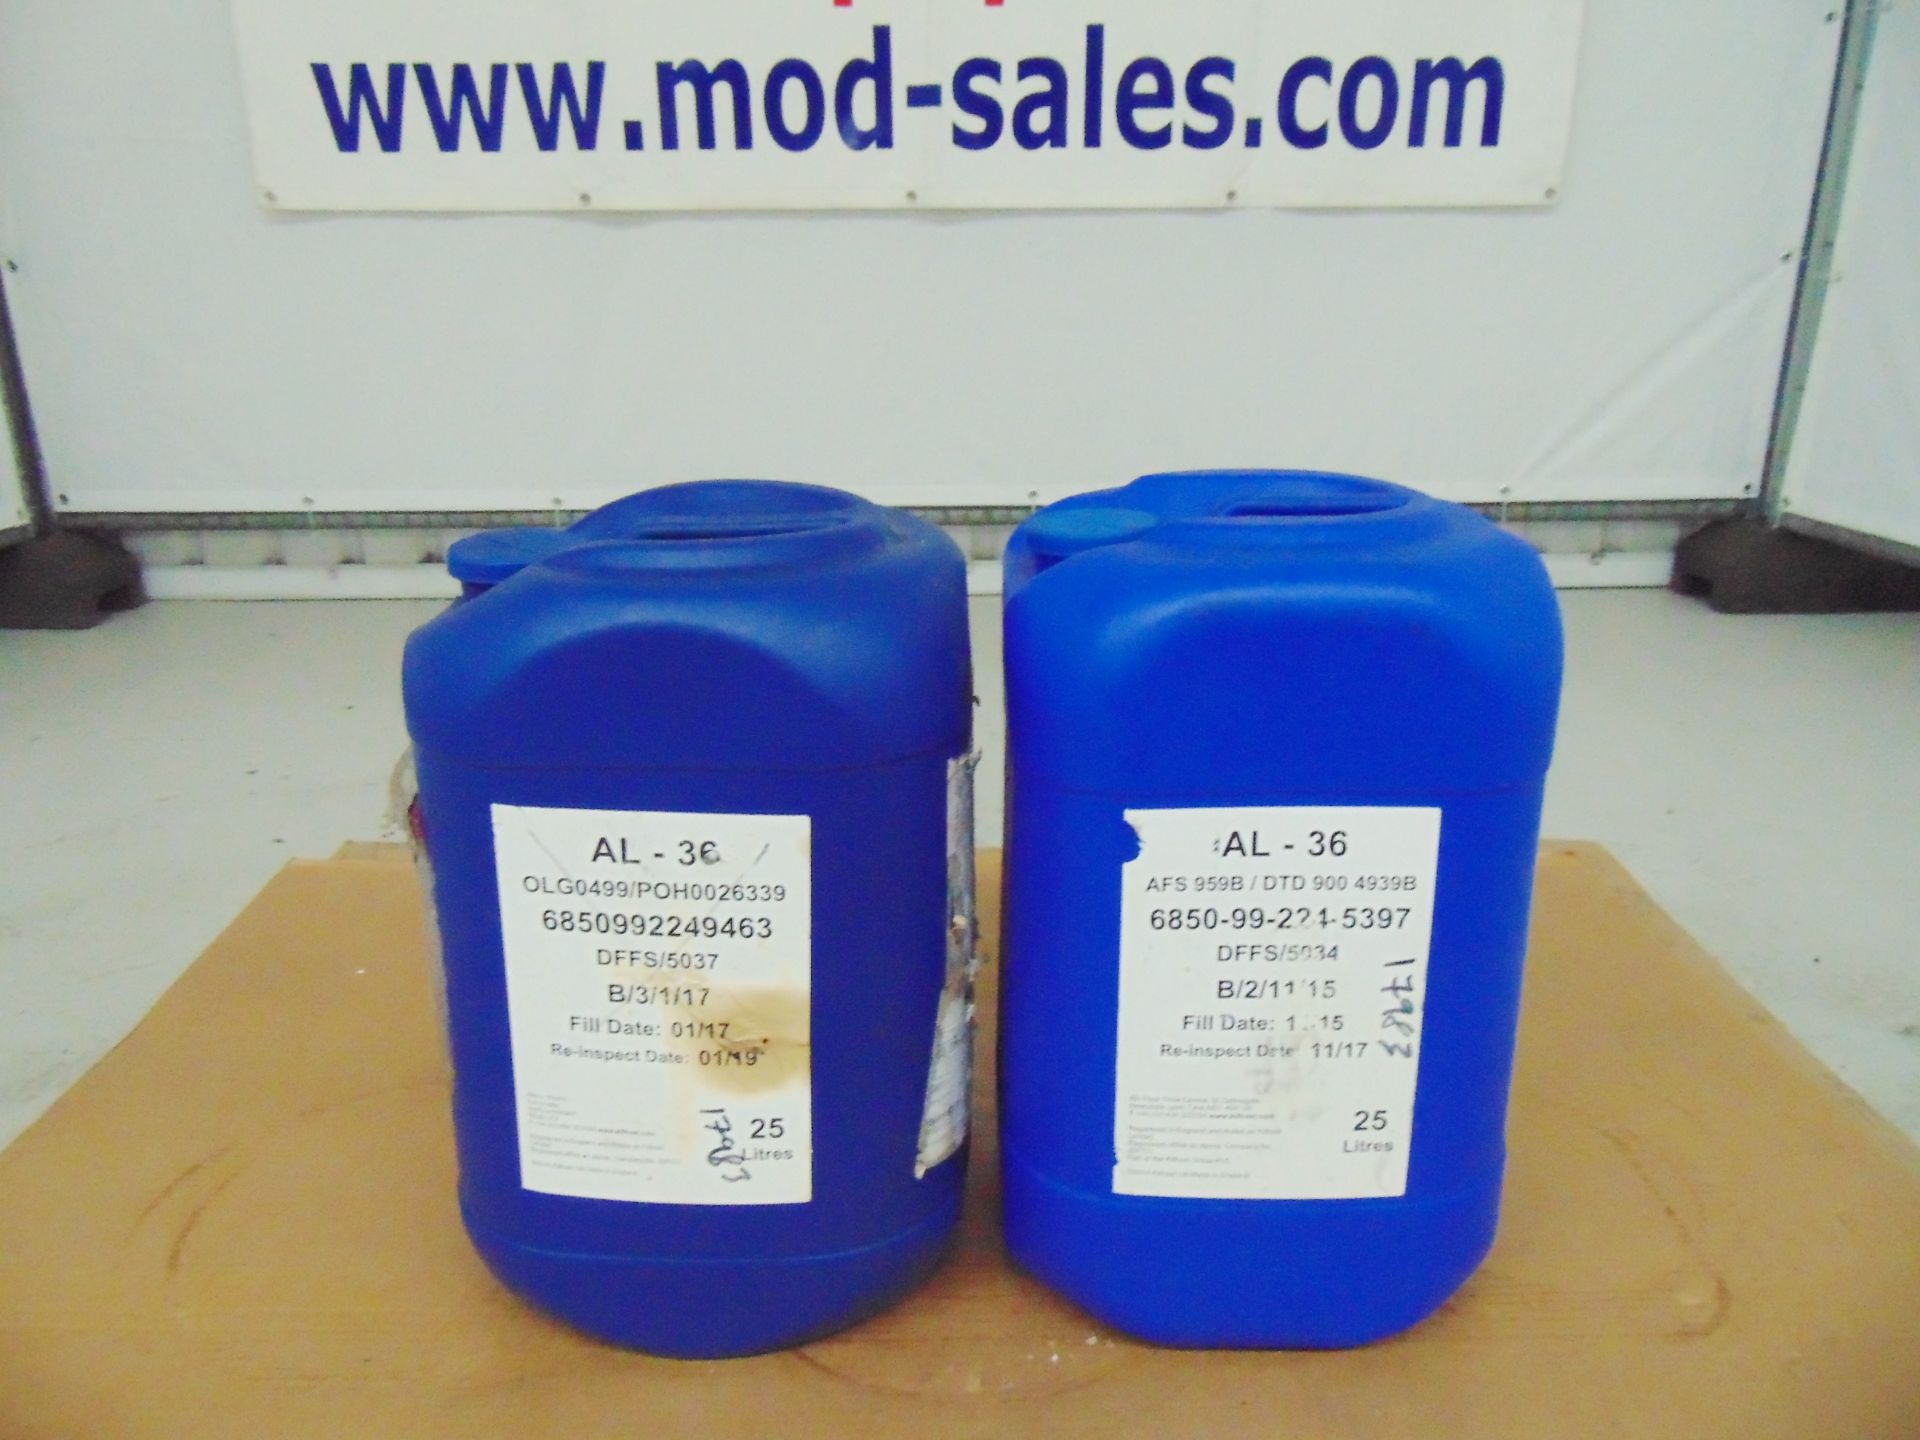 2 x Unissued 25L Tubs of Kilfrost AL-36 Aircraft Windscreen Washer & De-Icer